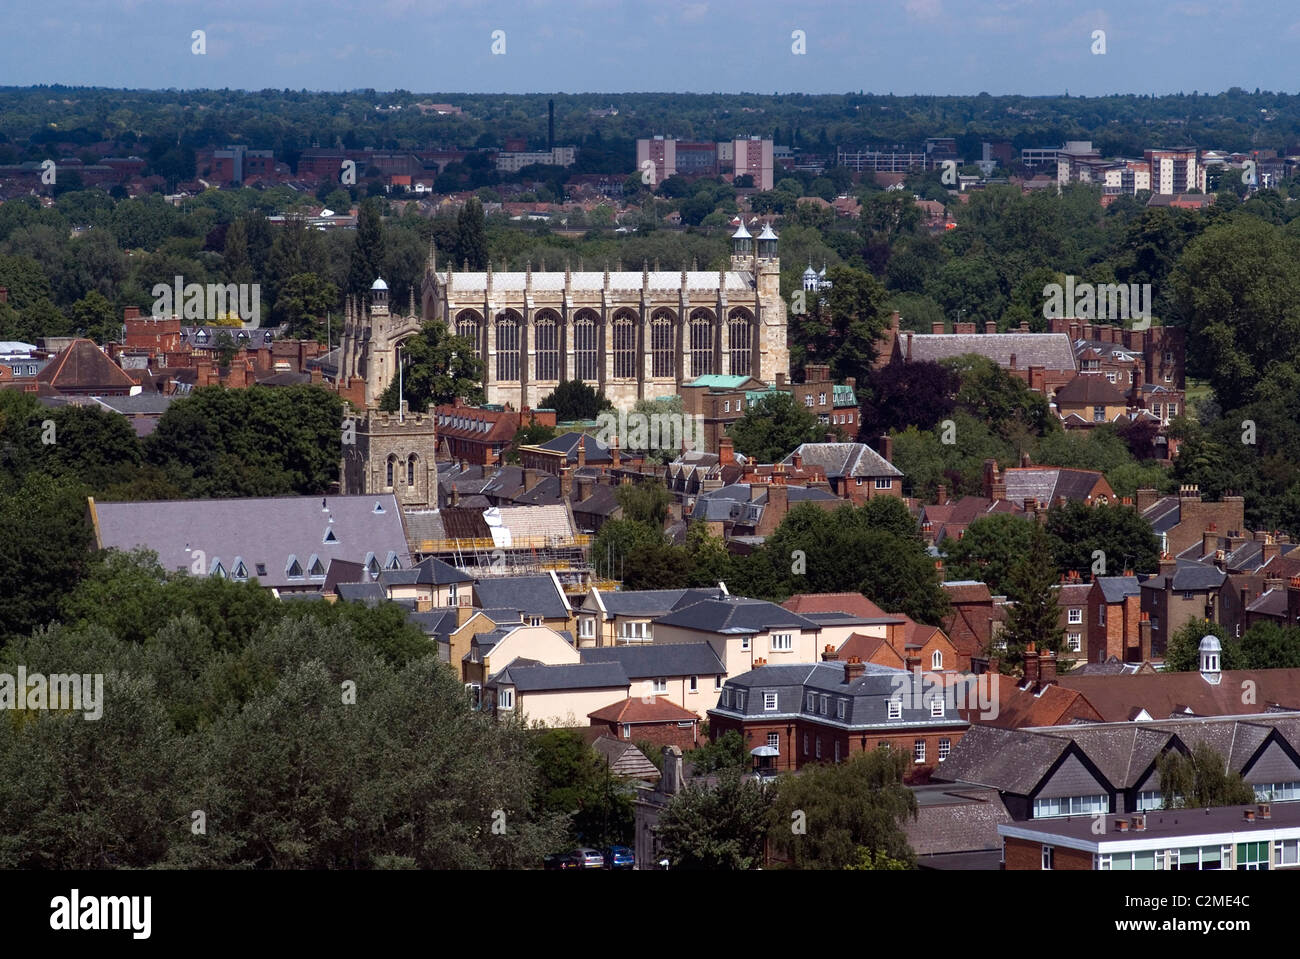 Aerial view of Eton town and College, with Eton College Chapel prominent, near Windsor, Berkshire Stock Photo